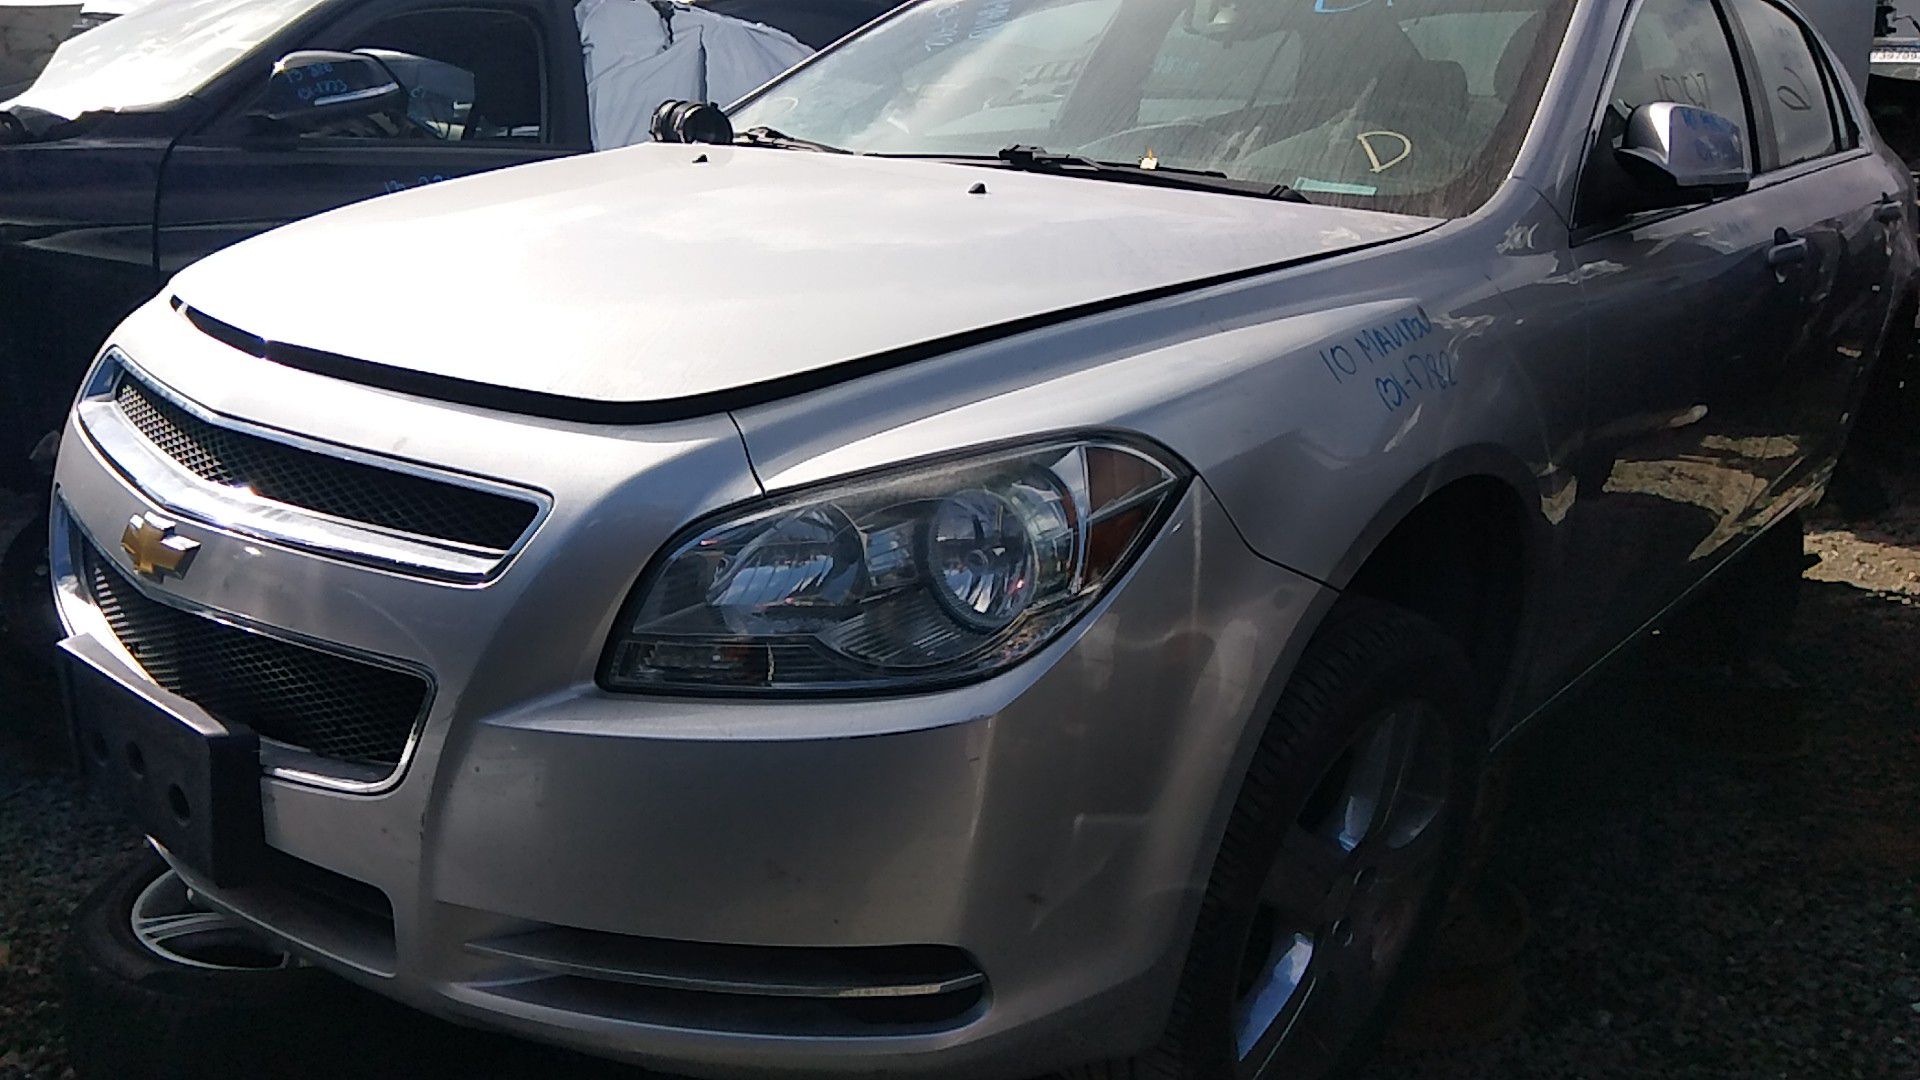 2010 Chevy Malibu parts only